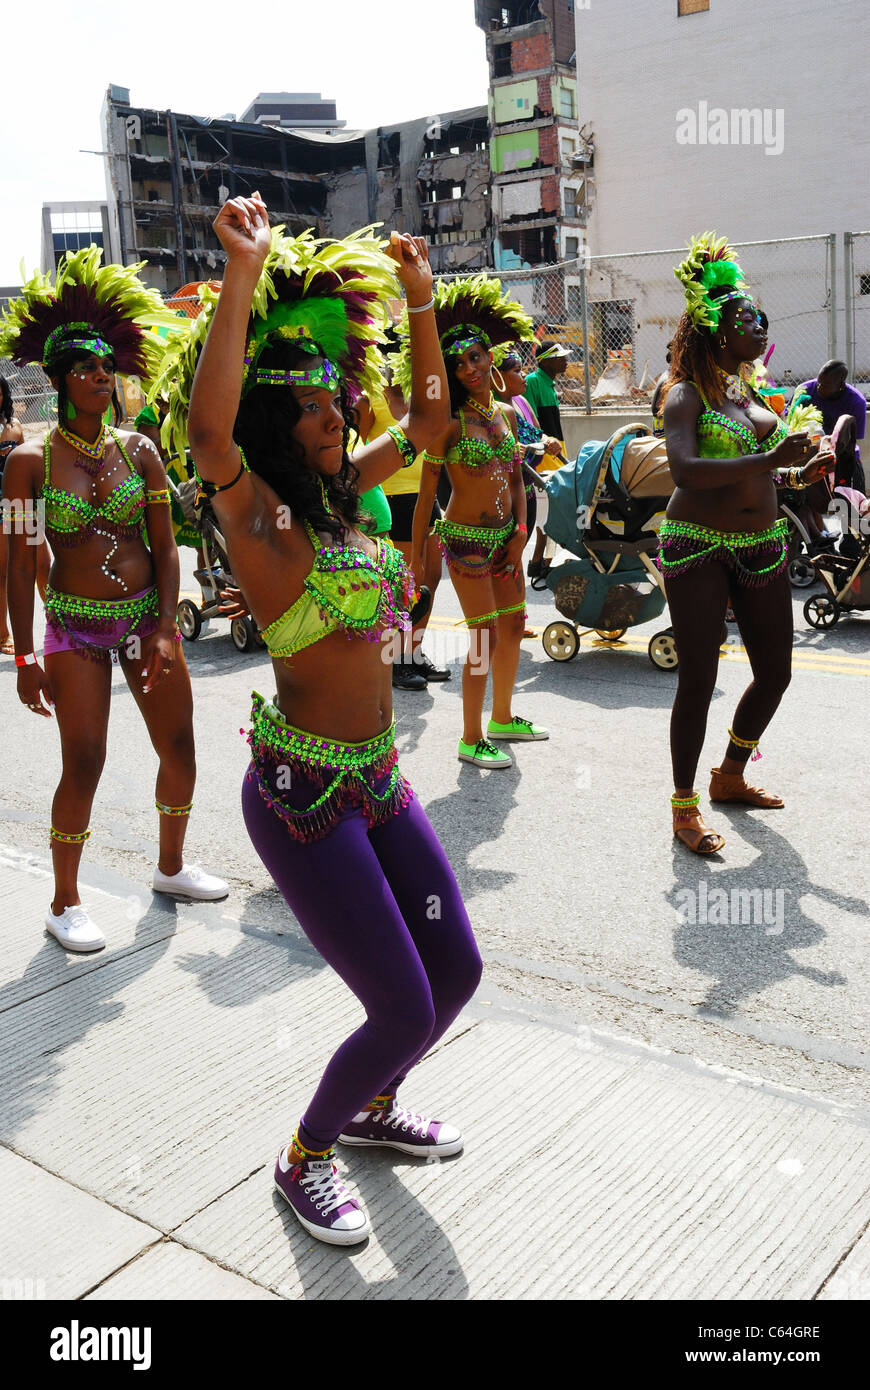 Jamaican women march and dance in Caribbean Festival. Stock Photo